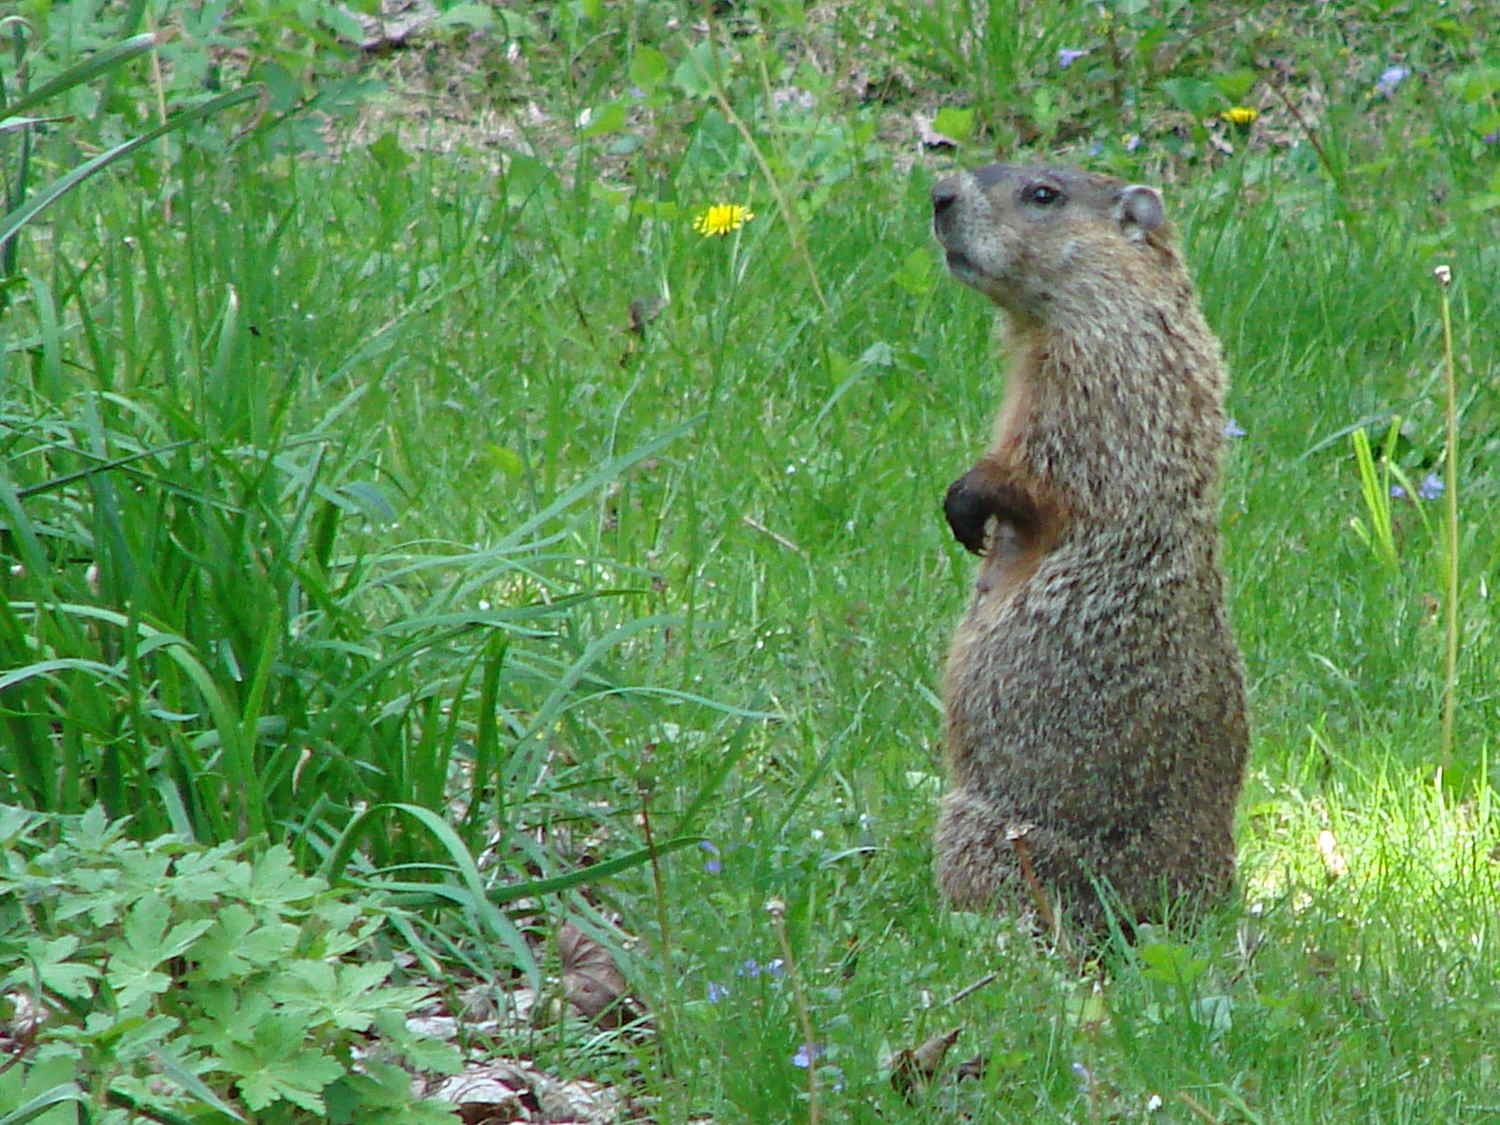 Groundhog On High Alert The Smell Of Molten Projects In The Morning